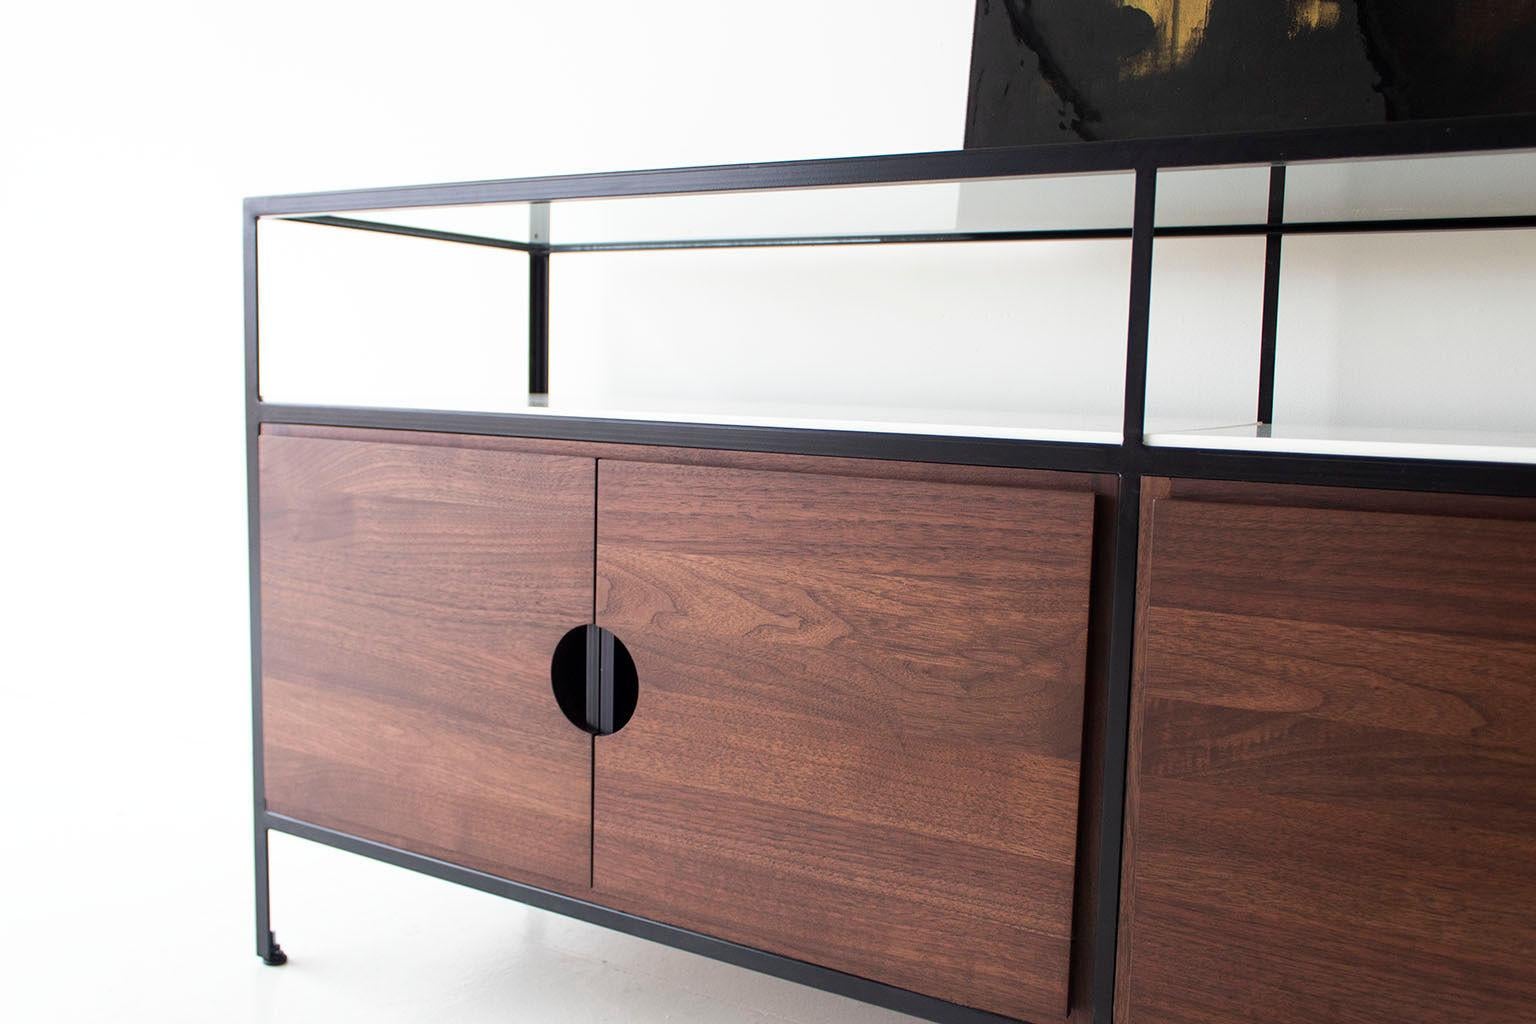 This Modern Walnut Credenza from the Cali Collection is made in the heart of Ohio with locally sourced wood. Each unit is handmade with solid black walnut and finished with a beautiful commercial grade matte finish. The frame is hand welded steel